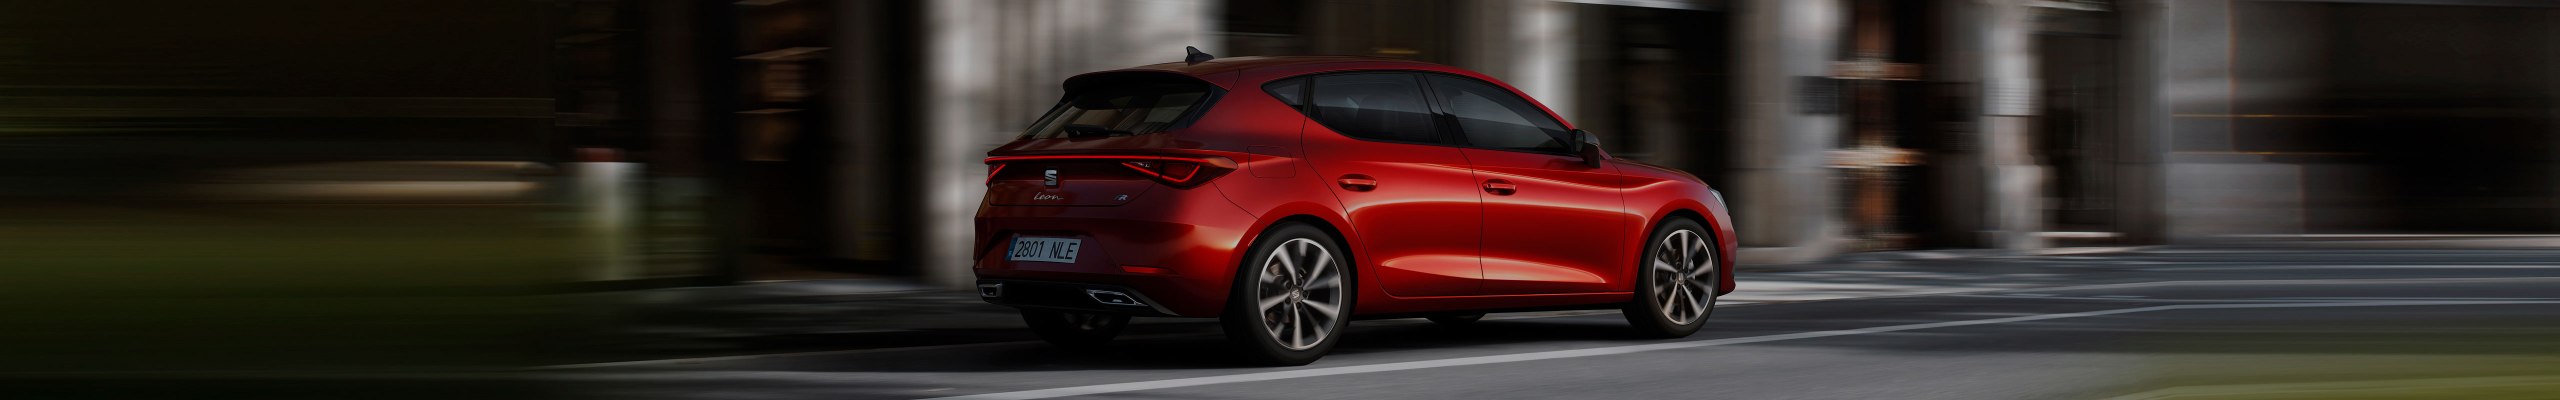 The All-new SEAT Leon